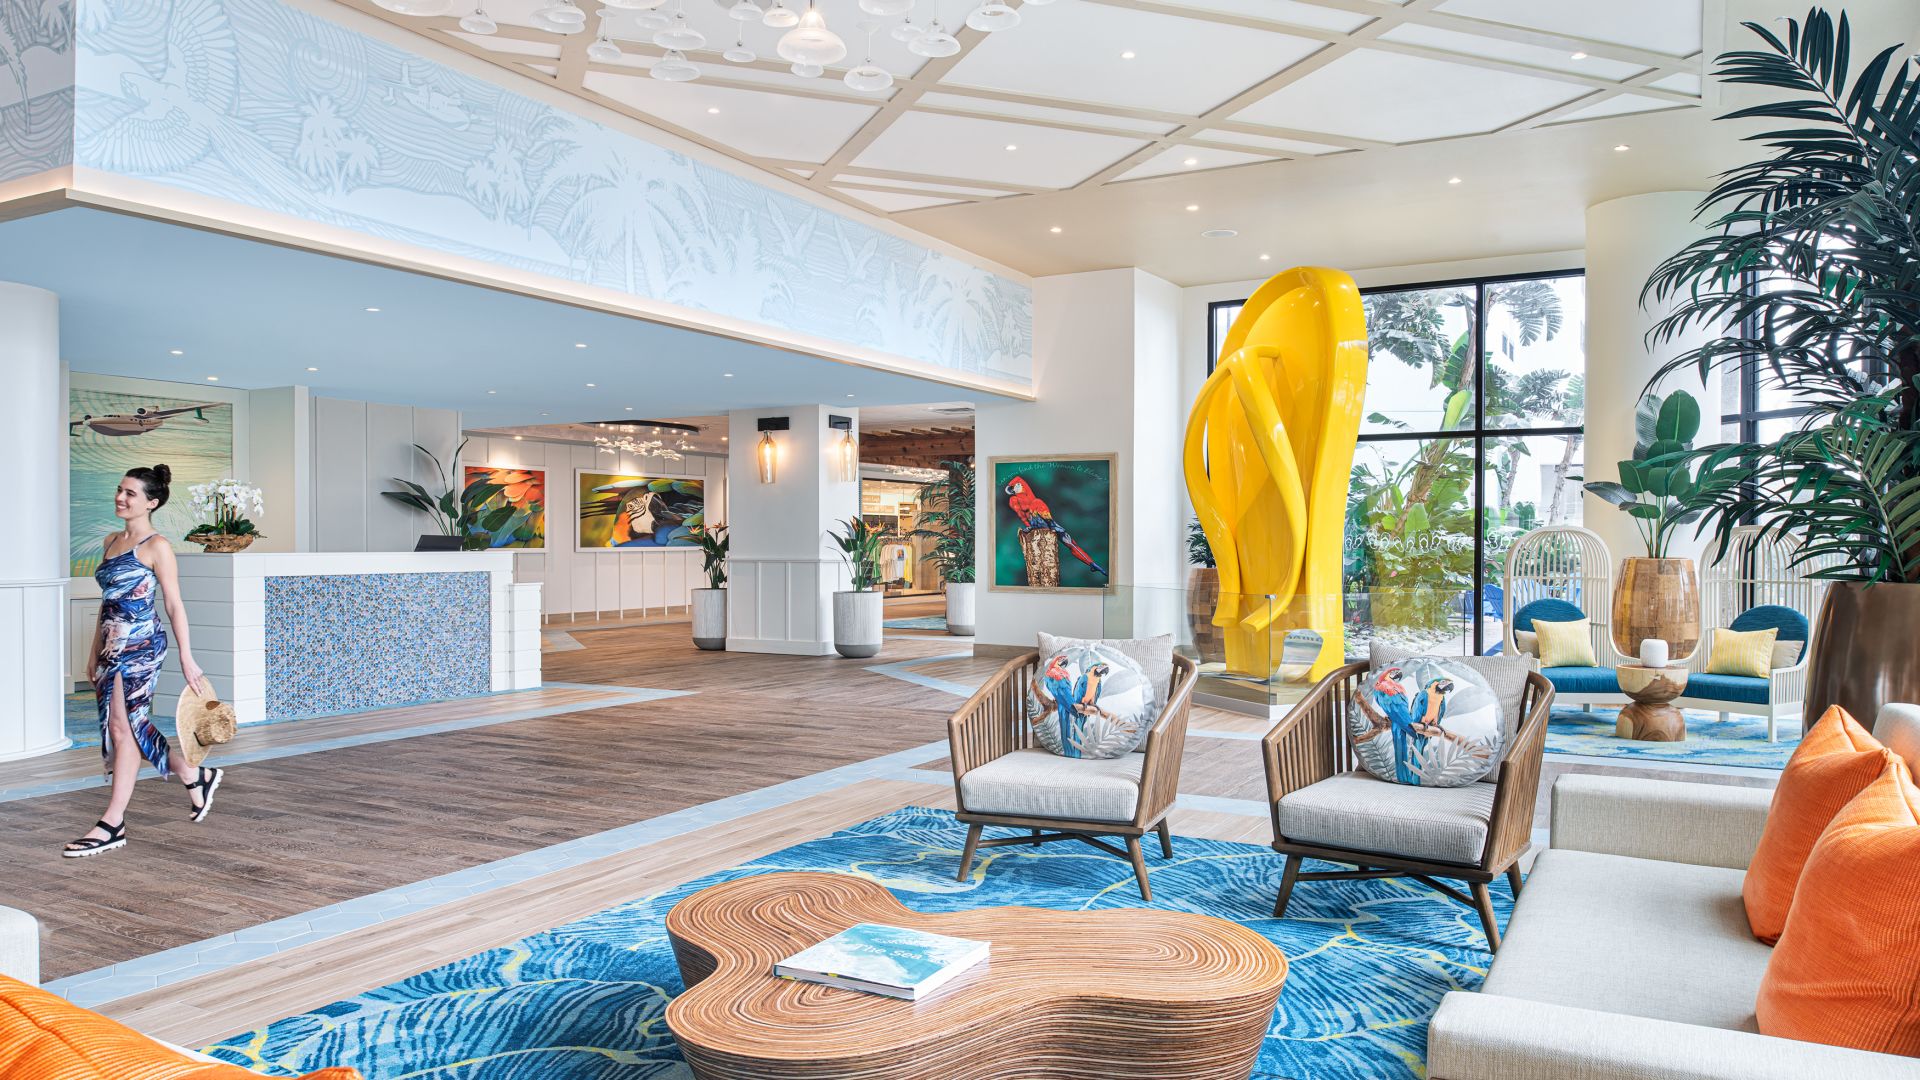 Lobby of Resort with couches and chairs and colorful rug and yellow flip flop sculpture